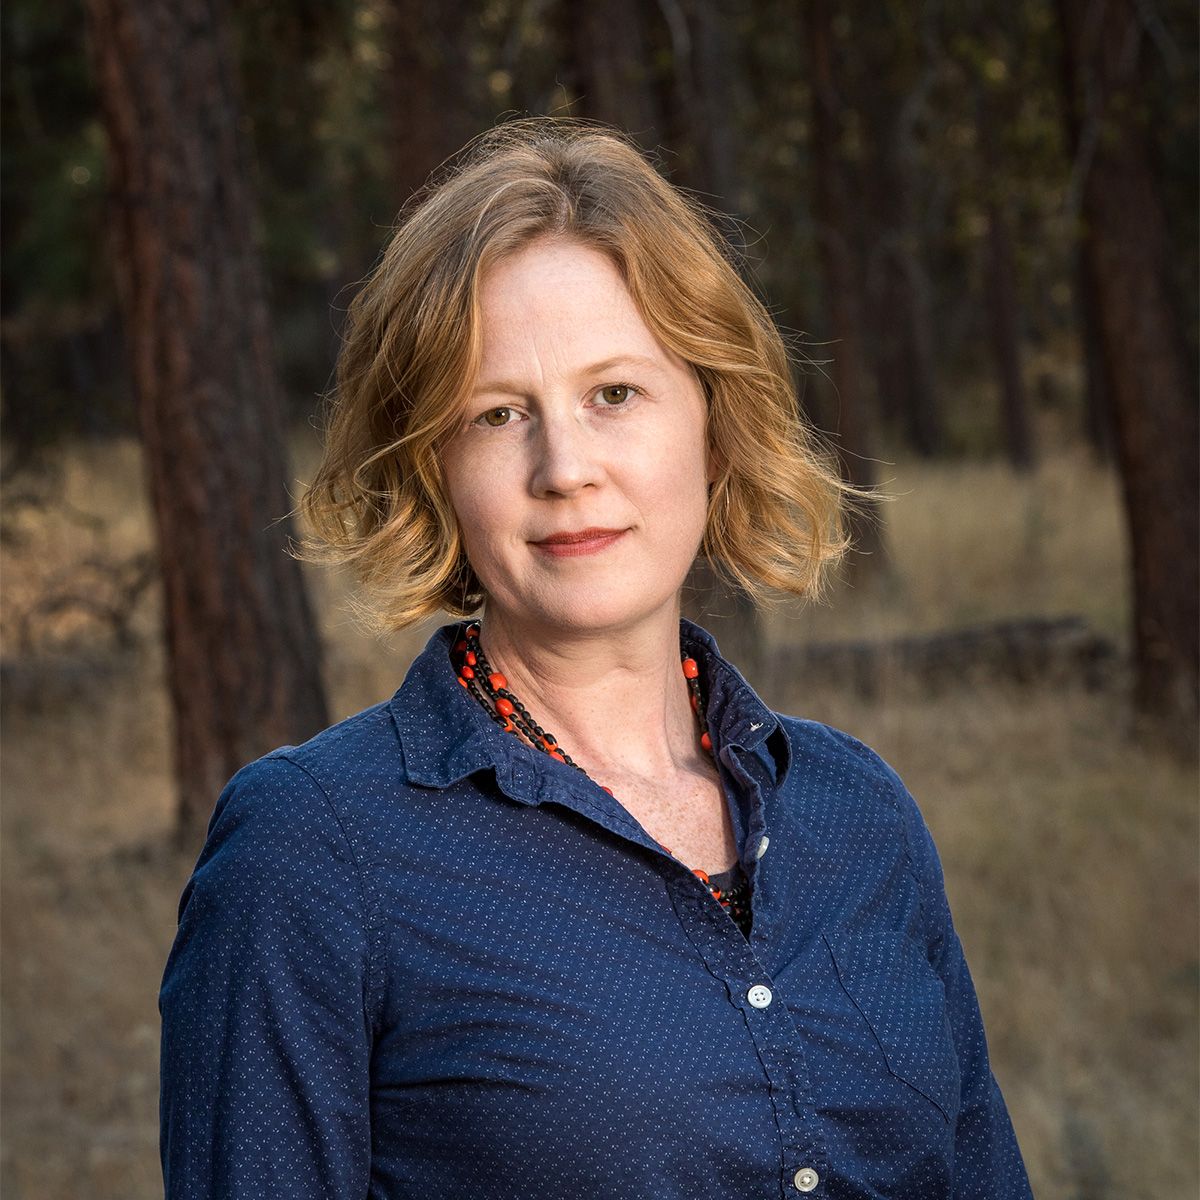 Author Emma Marris stands in front of a forest, looking at the camera.